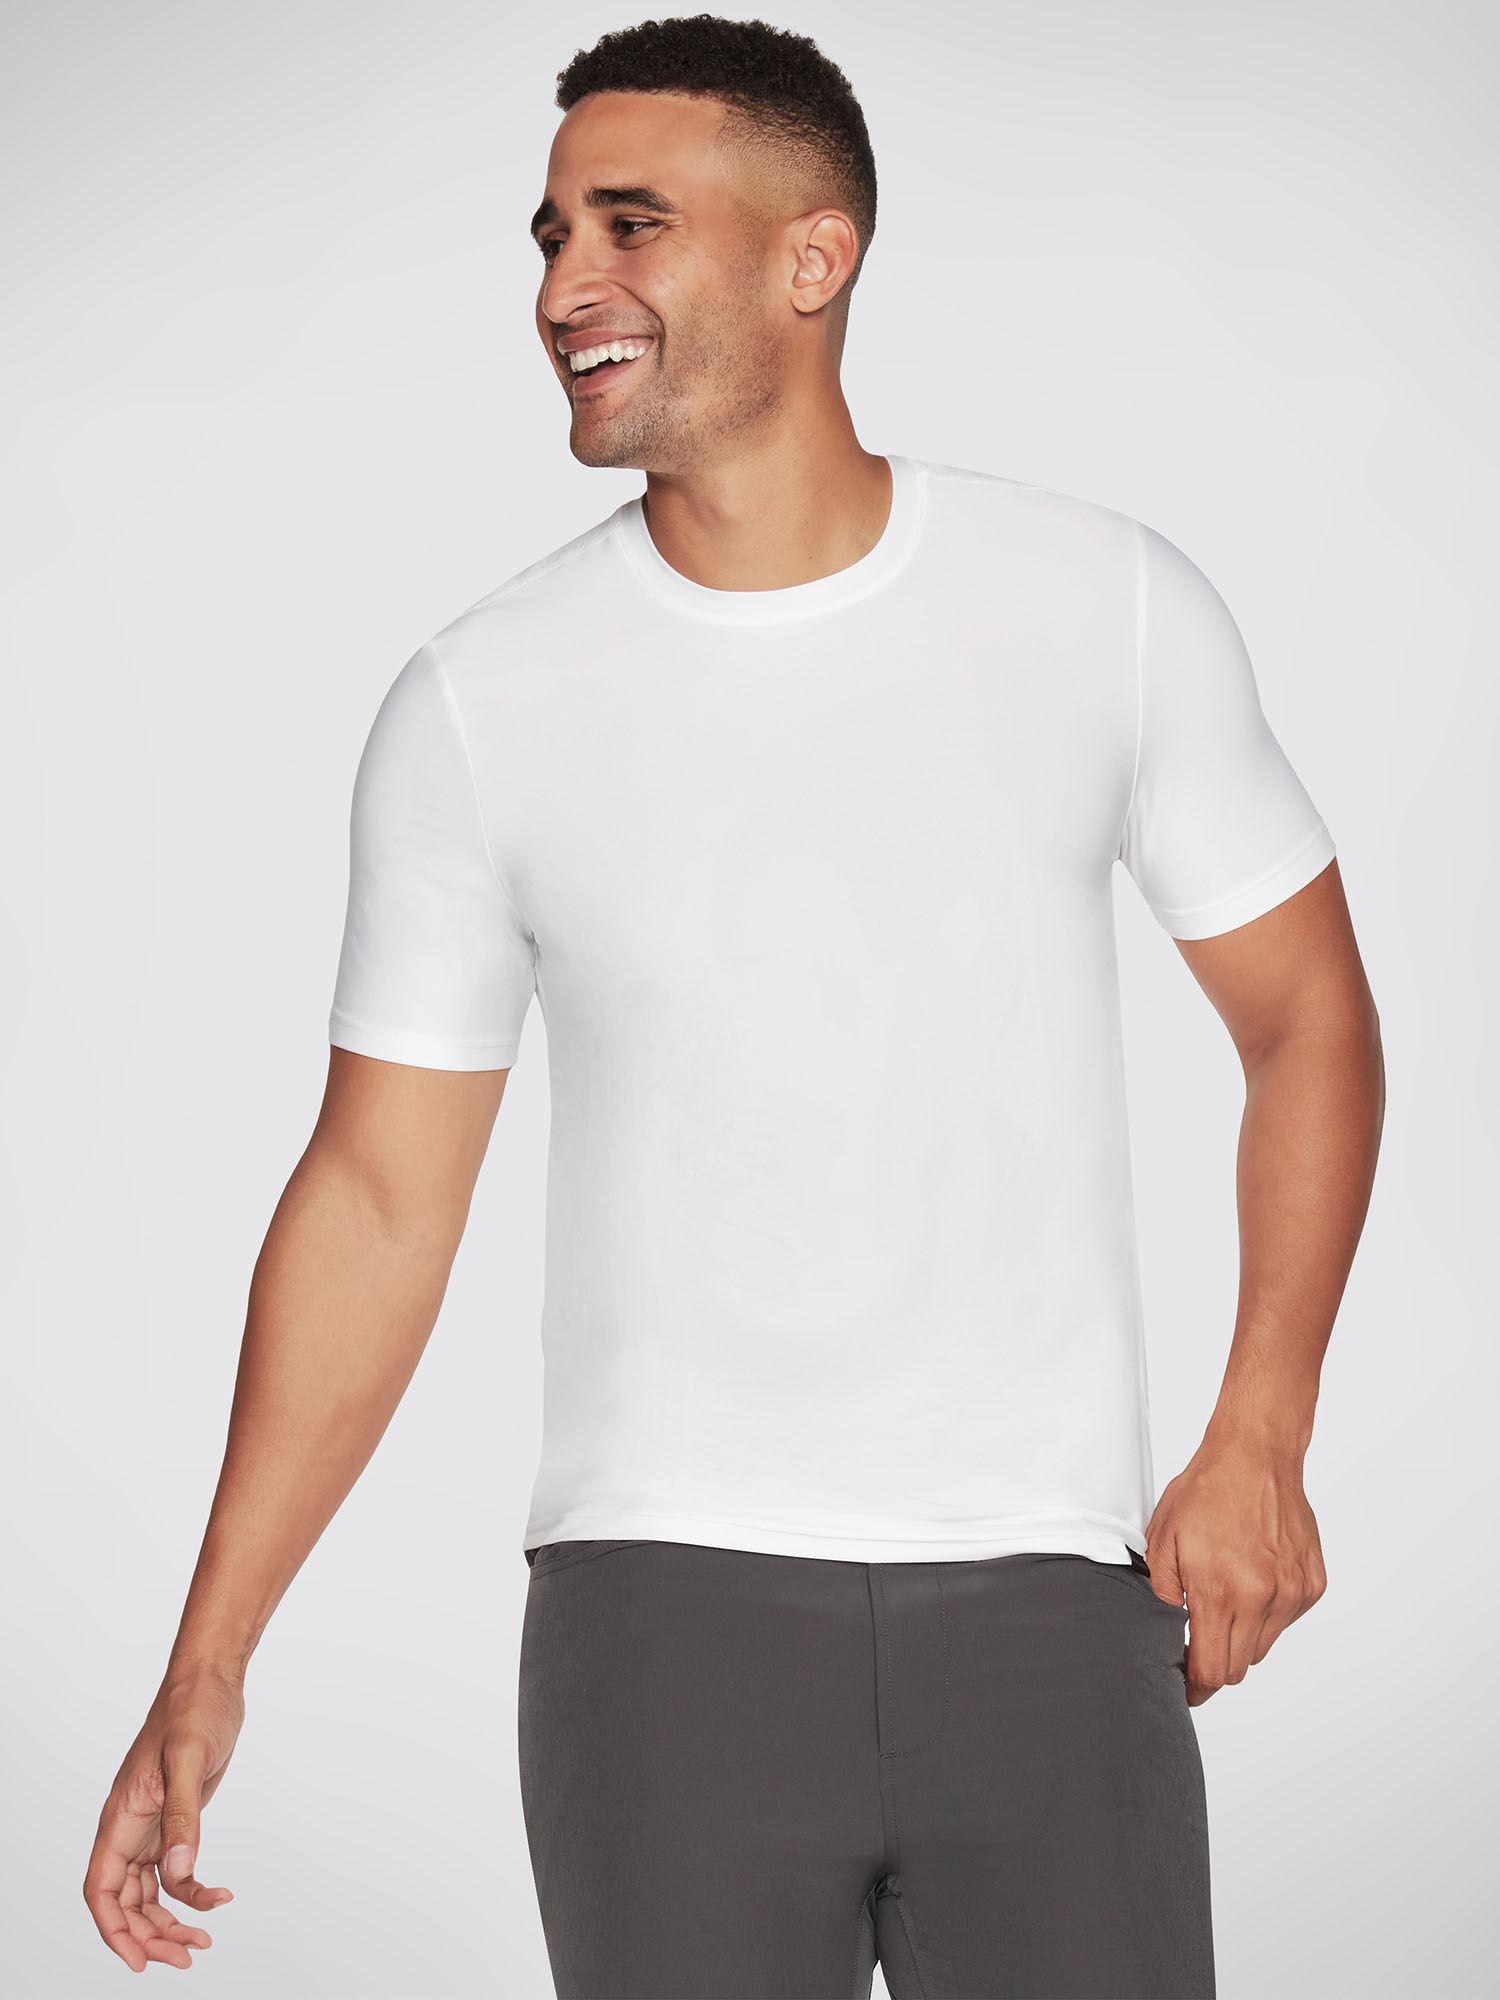 godri-all-day-solid-tee